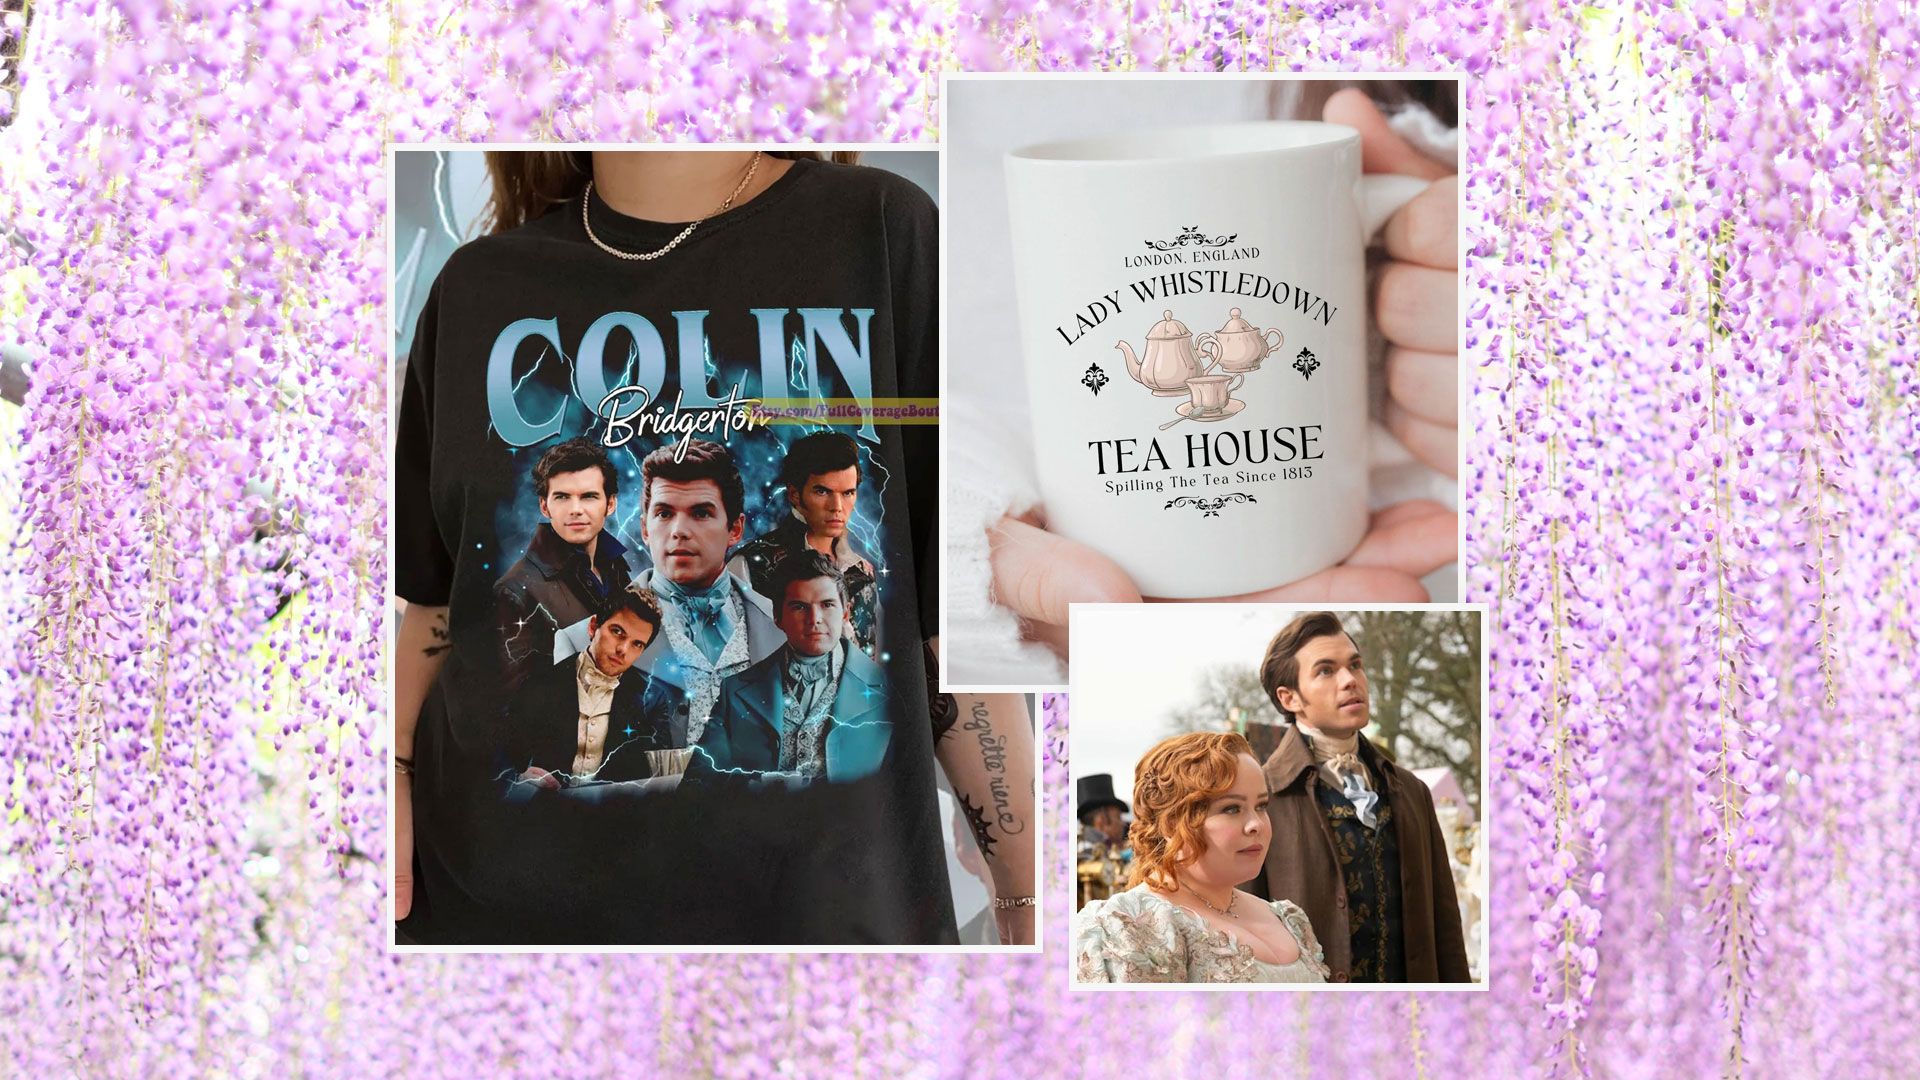 Bridgerton gifts: 11 things to buy for fans who burn for the show